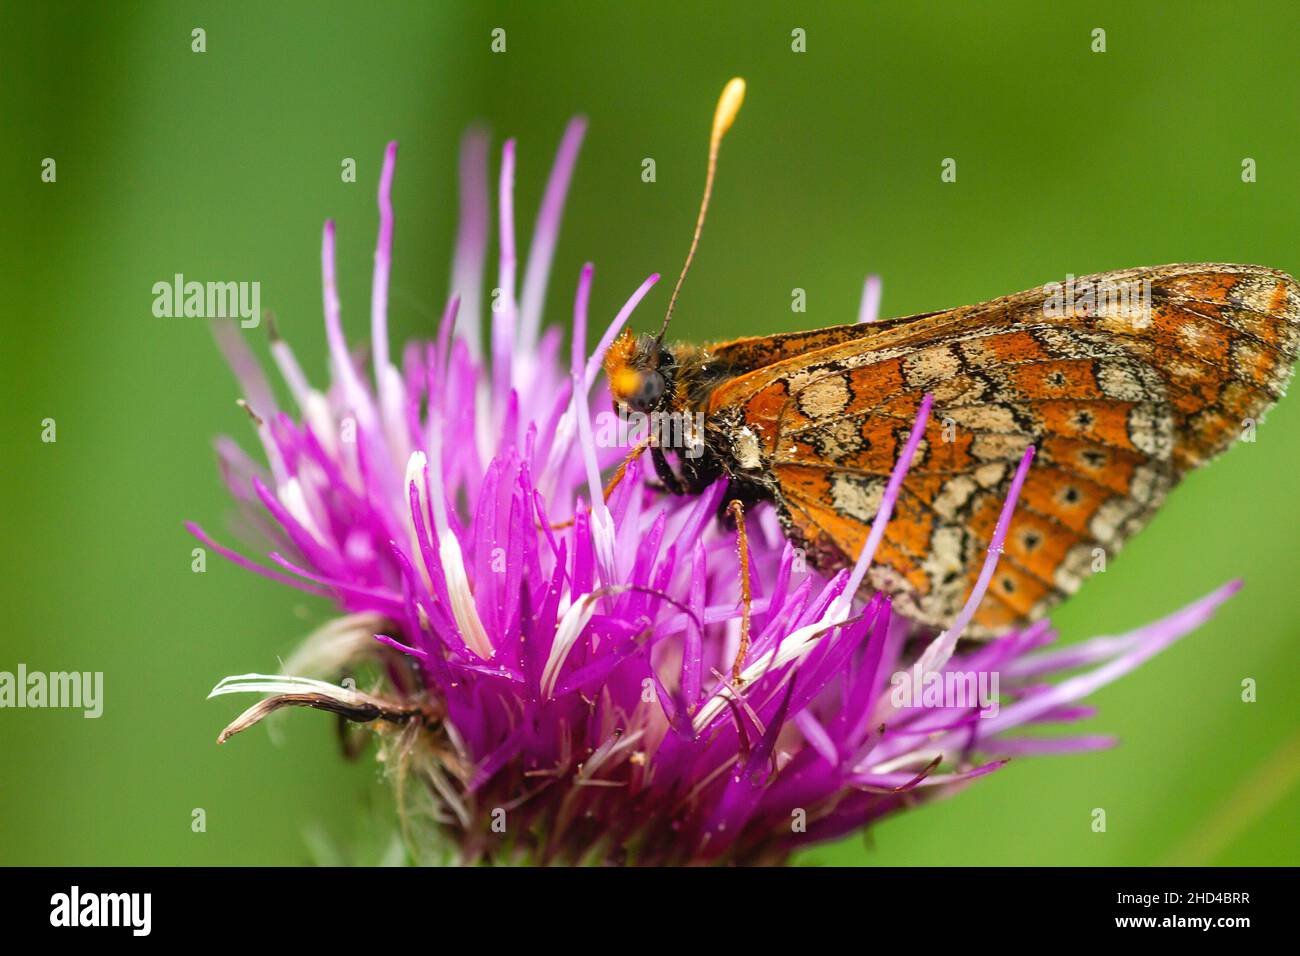 Butterfly pollintaing carduus defloratus thistle flower Stock Photo